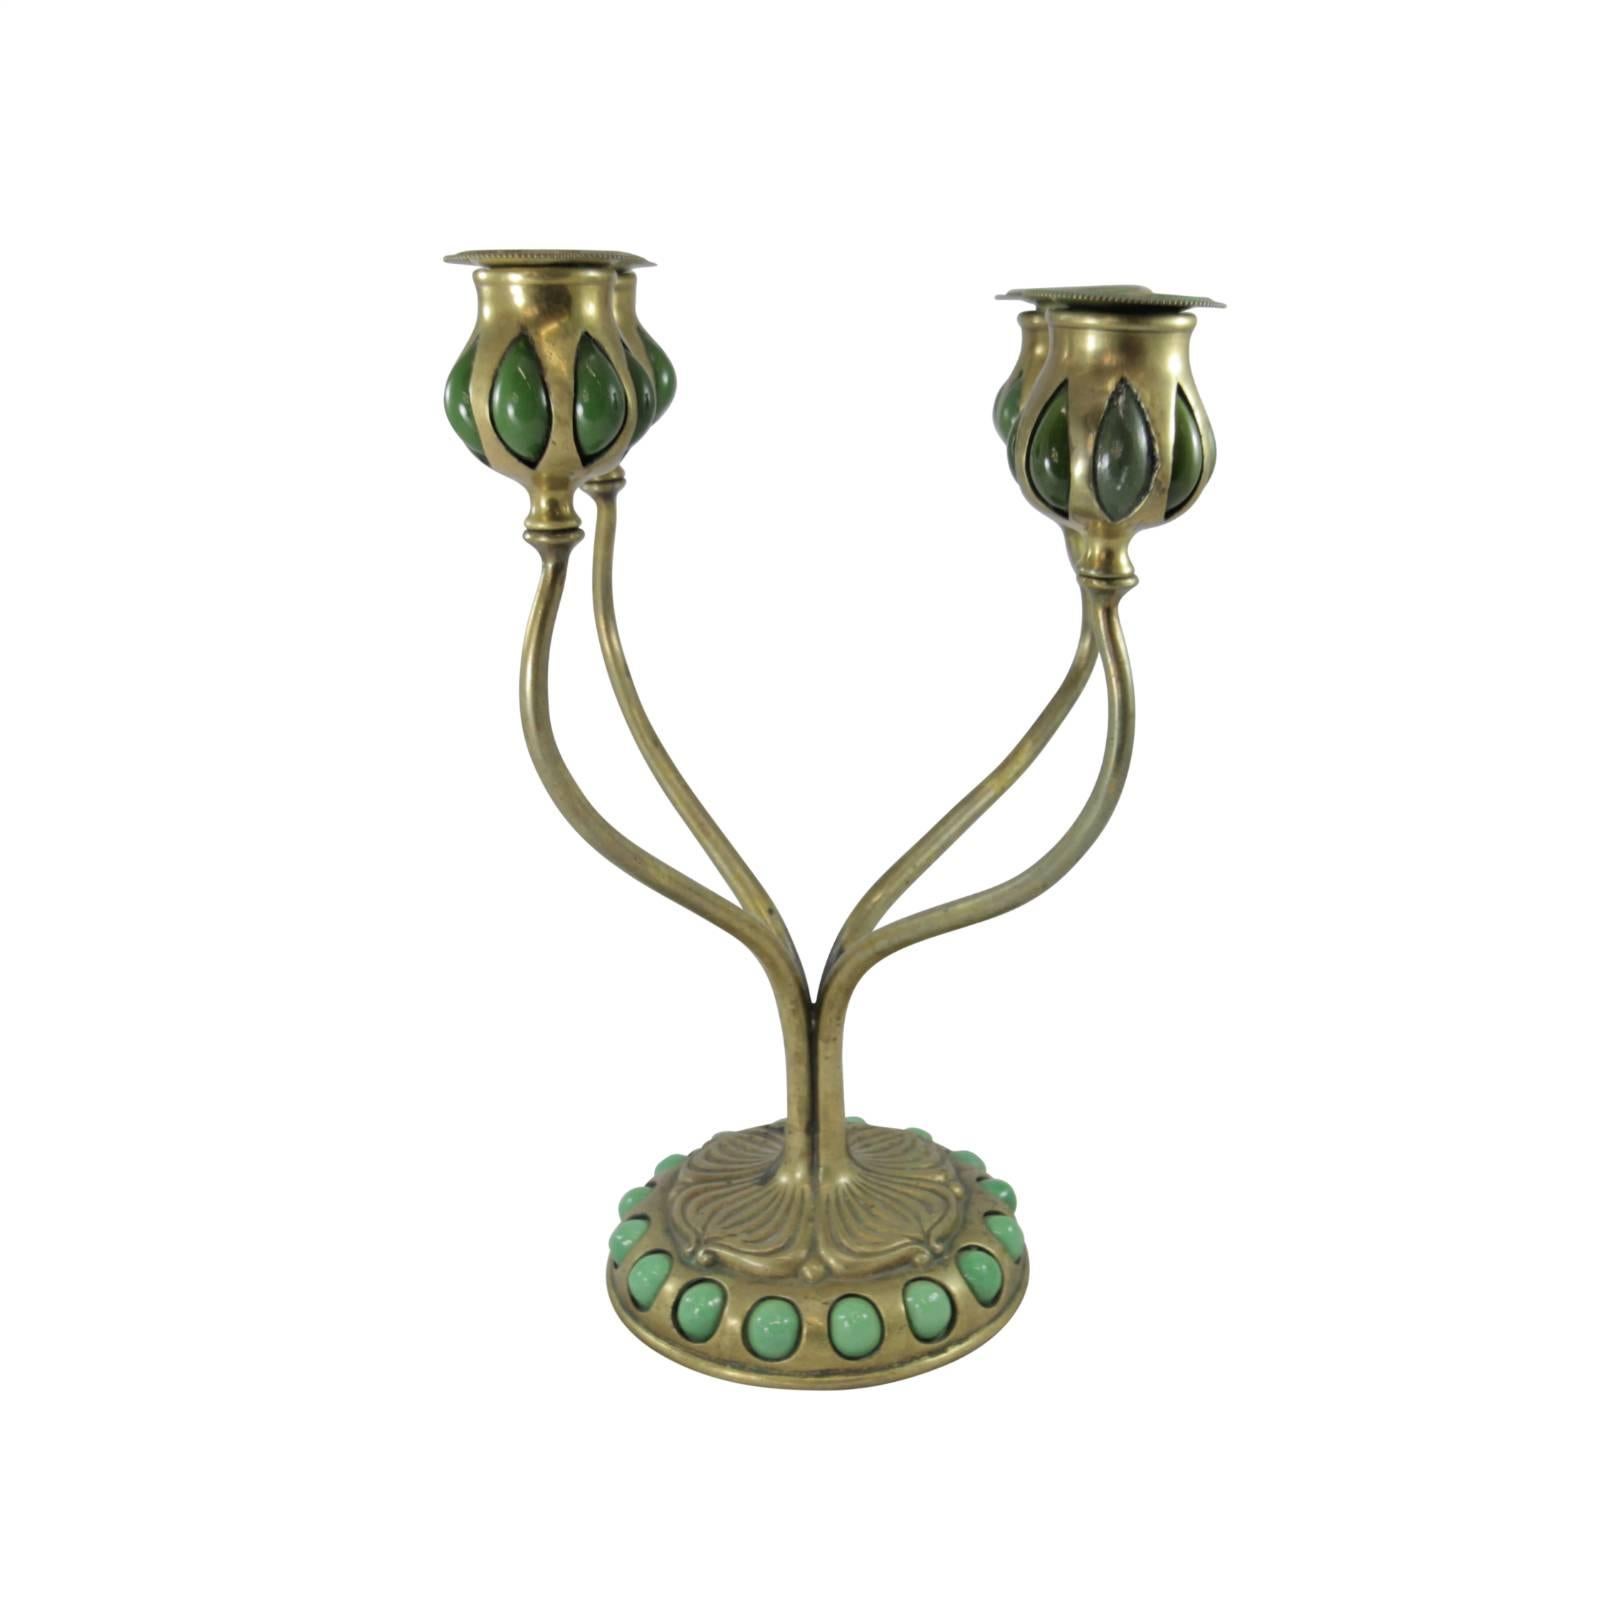 The Art Nouveau movement during the turn of the century was categorised by natural forms and structures, particularly the curved lines of plants and flowers. It's not hard to see the organic influence in this early Tiffany Studios candelabra, with